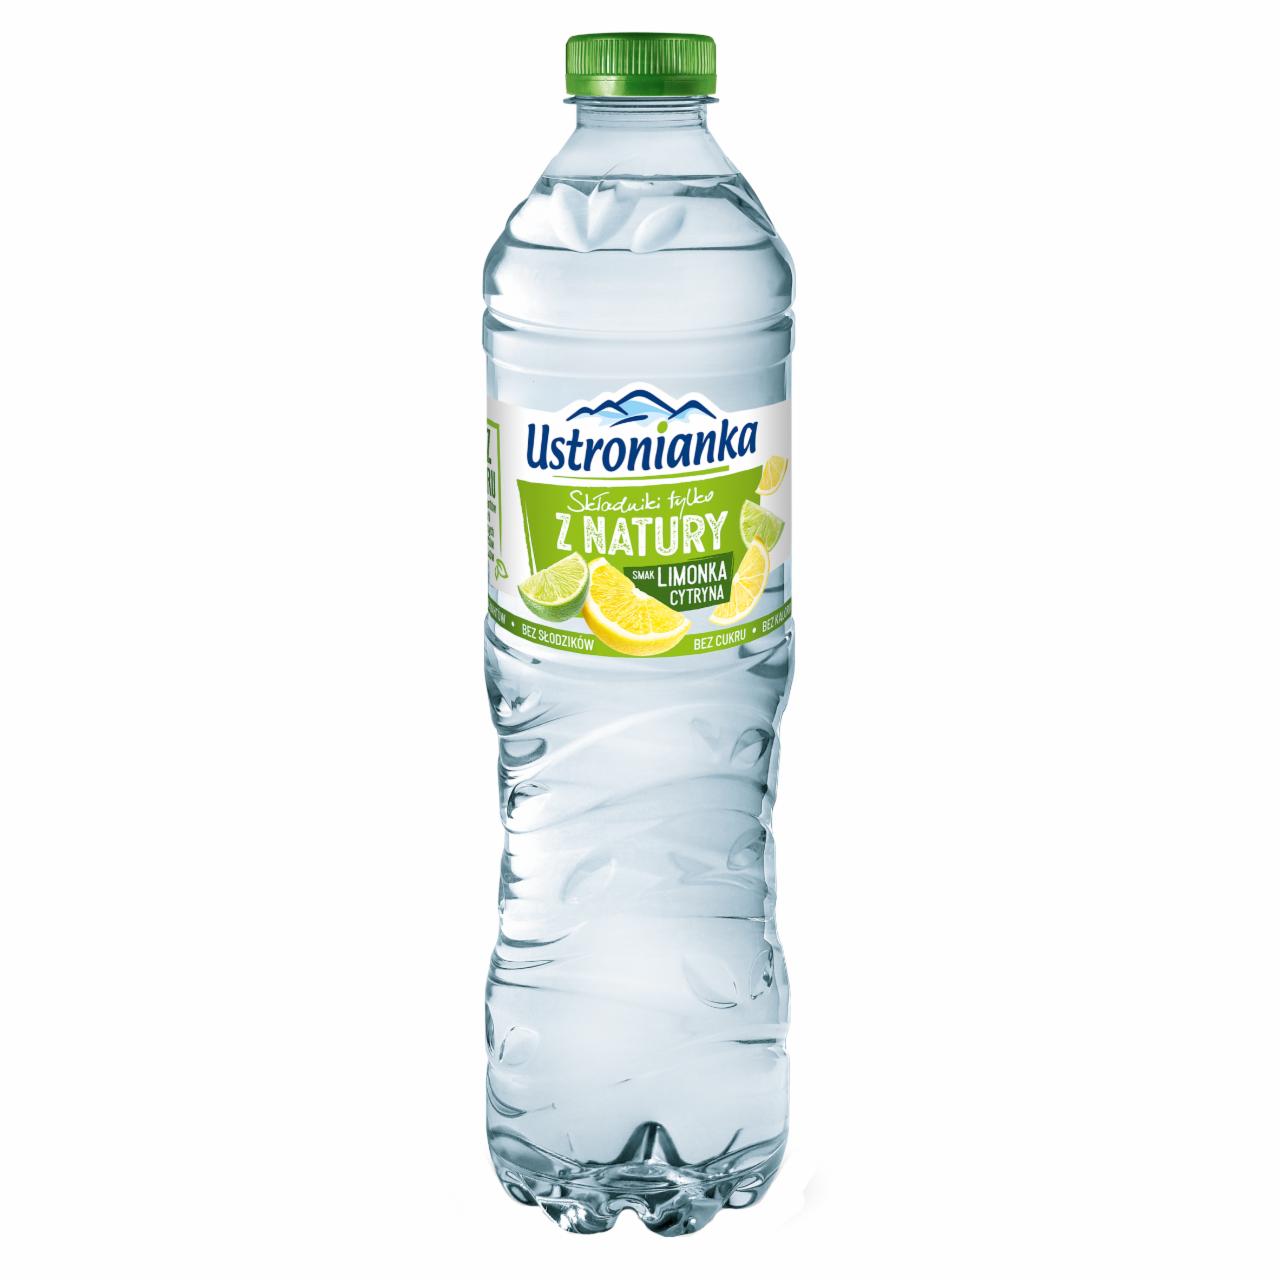 Photo - Ustronianka Lime Lemon Flavoured Non-Carbonated Drink 1.5 L